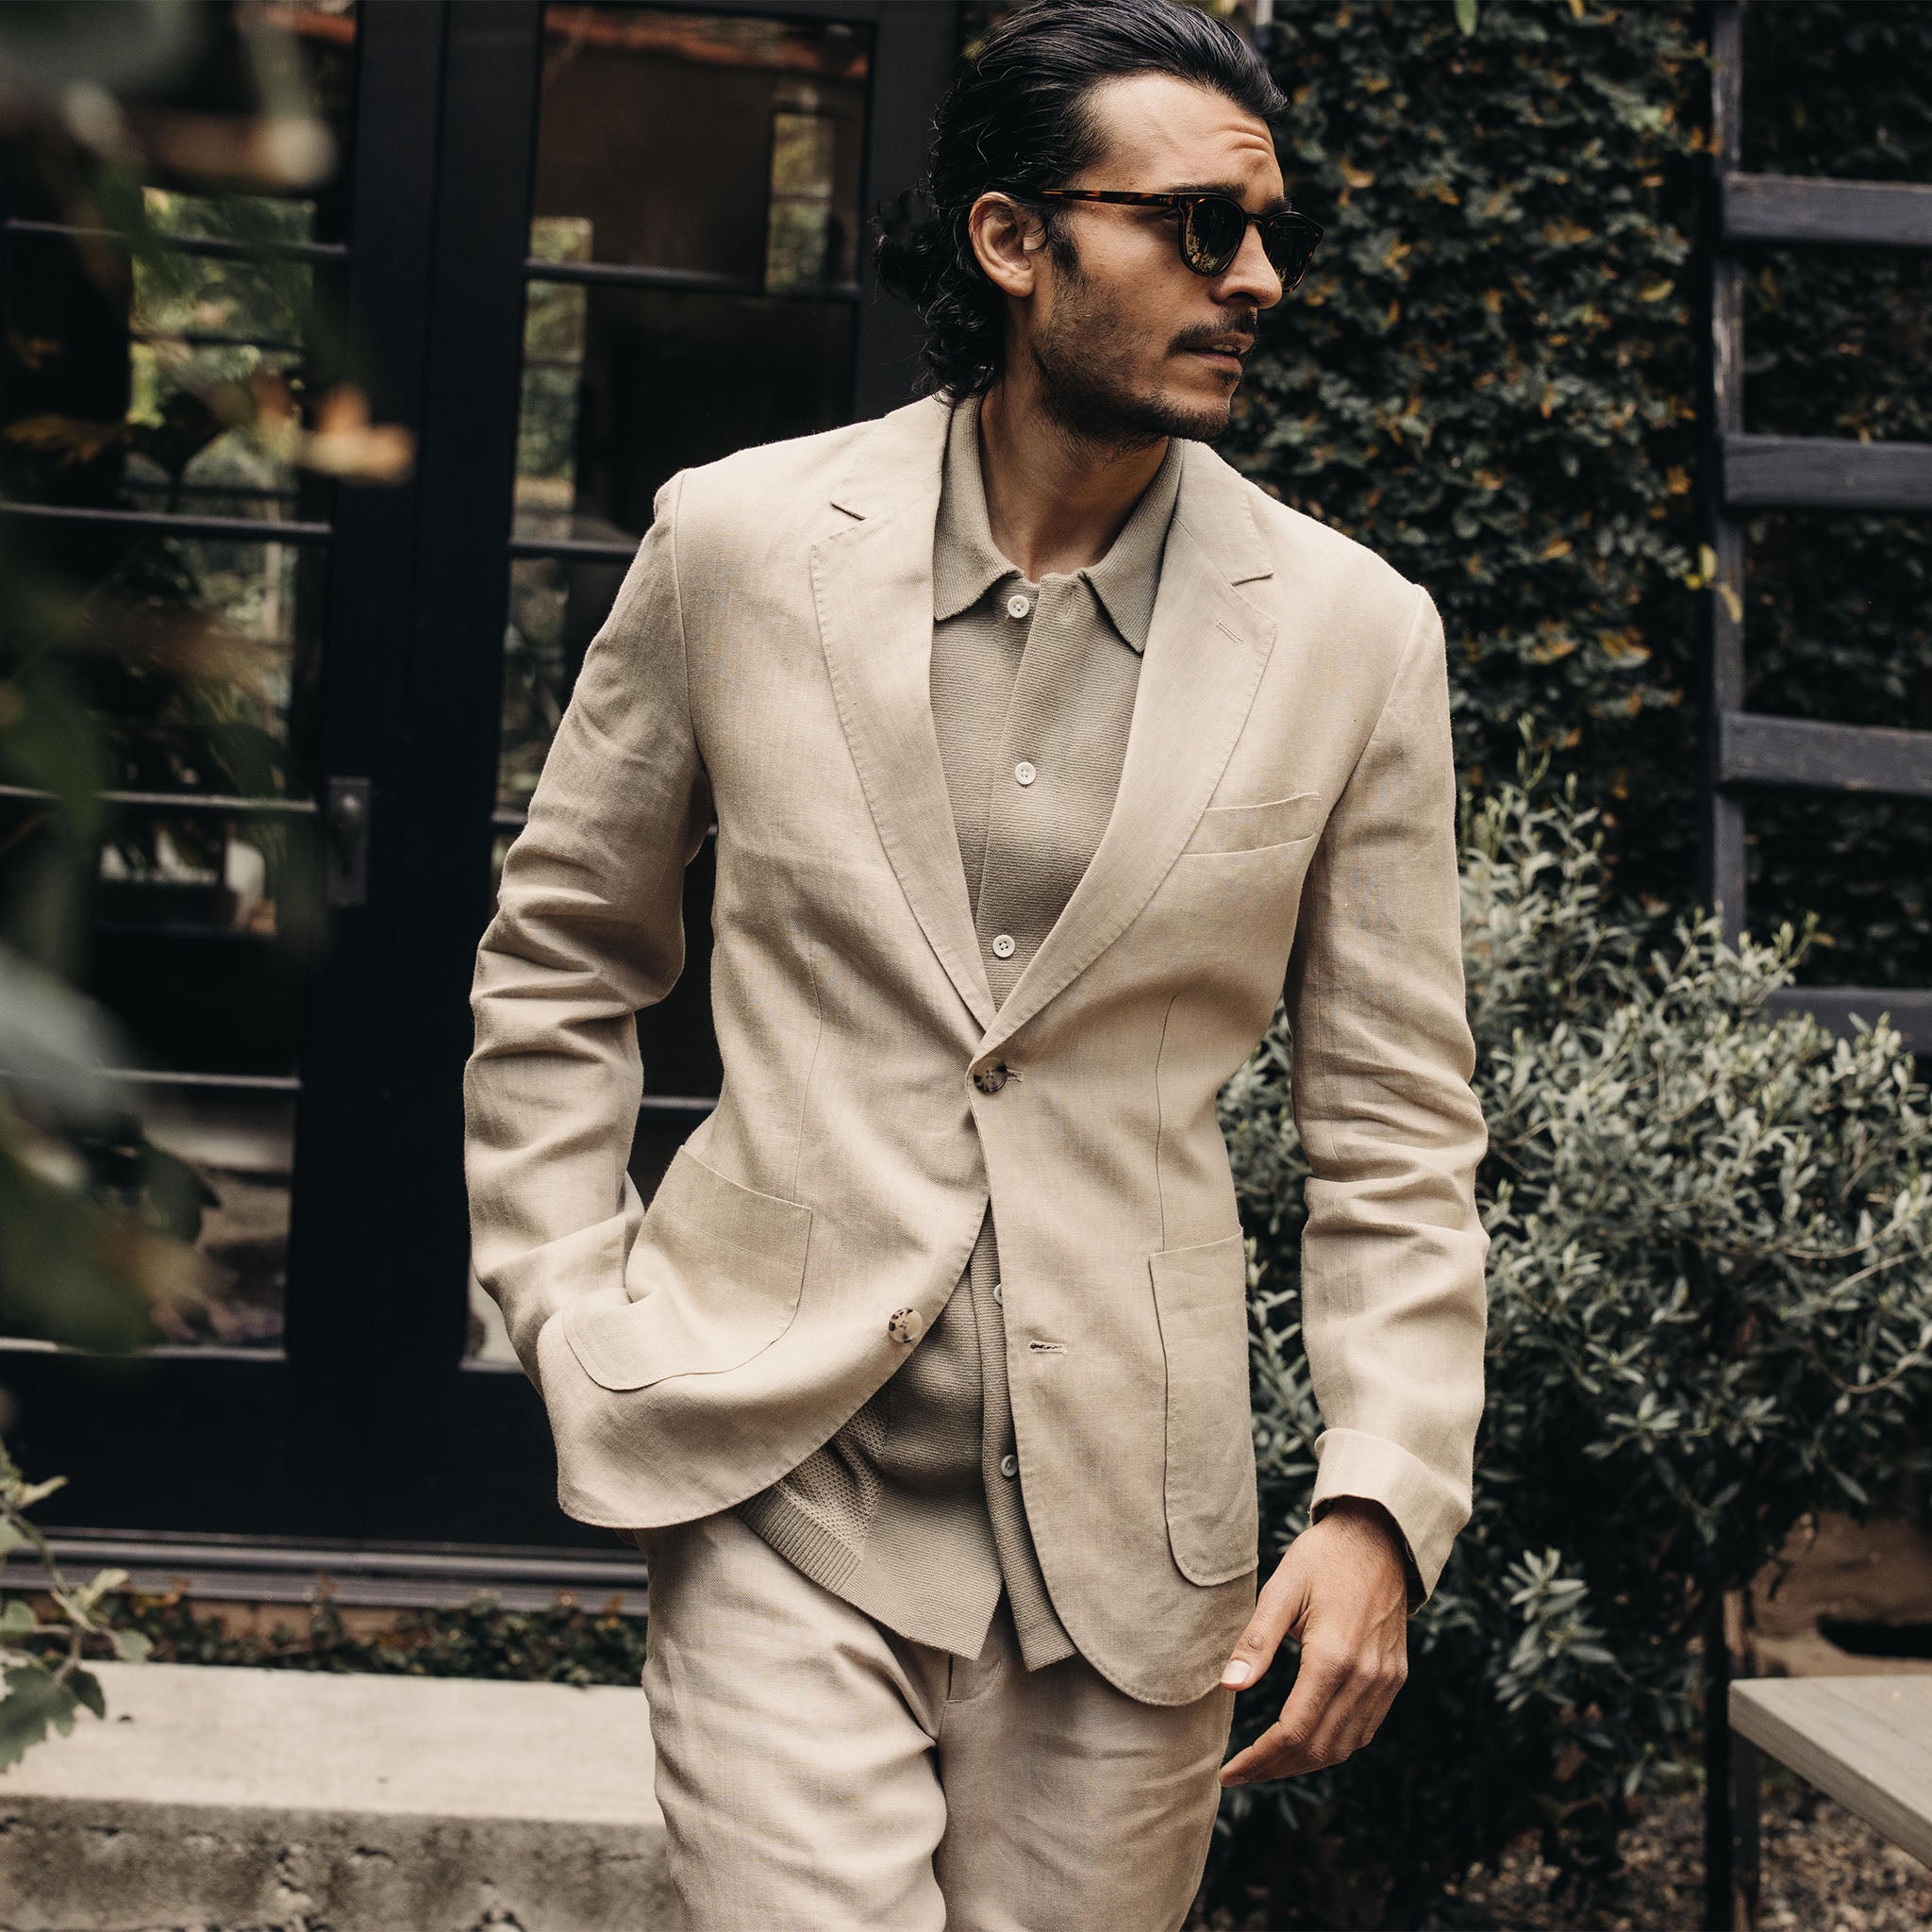 Model in a tan suit and sunglasses.